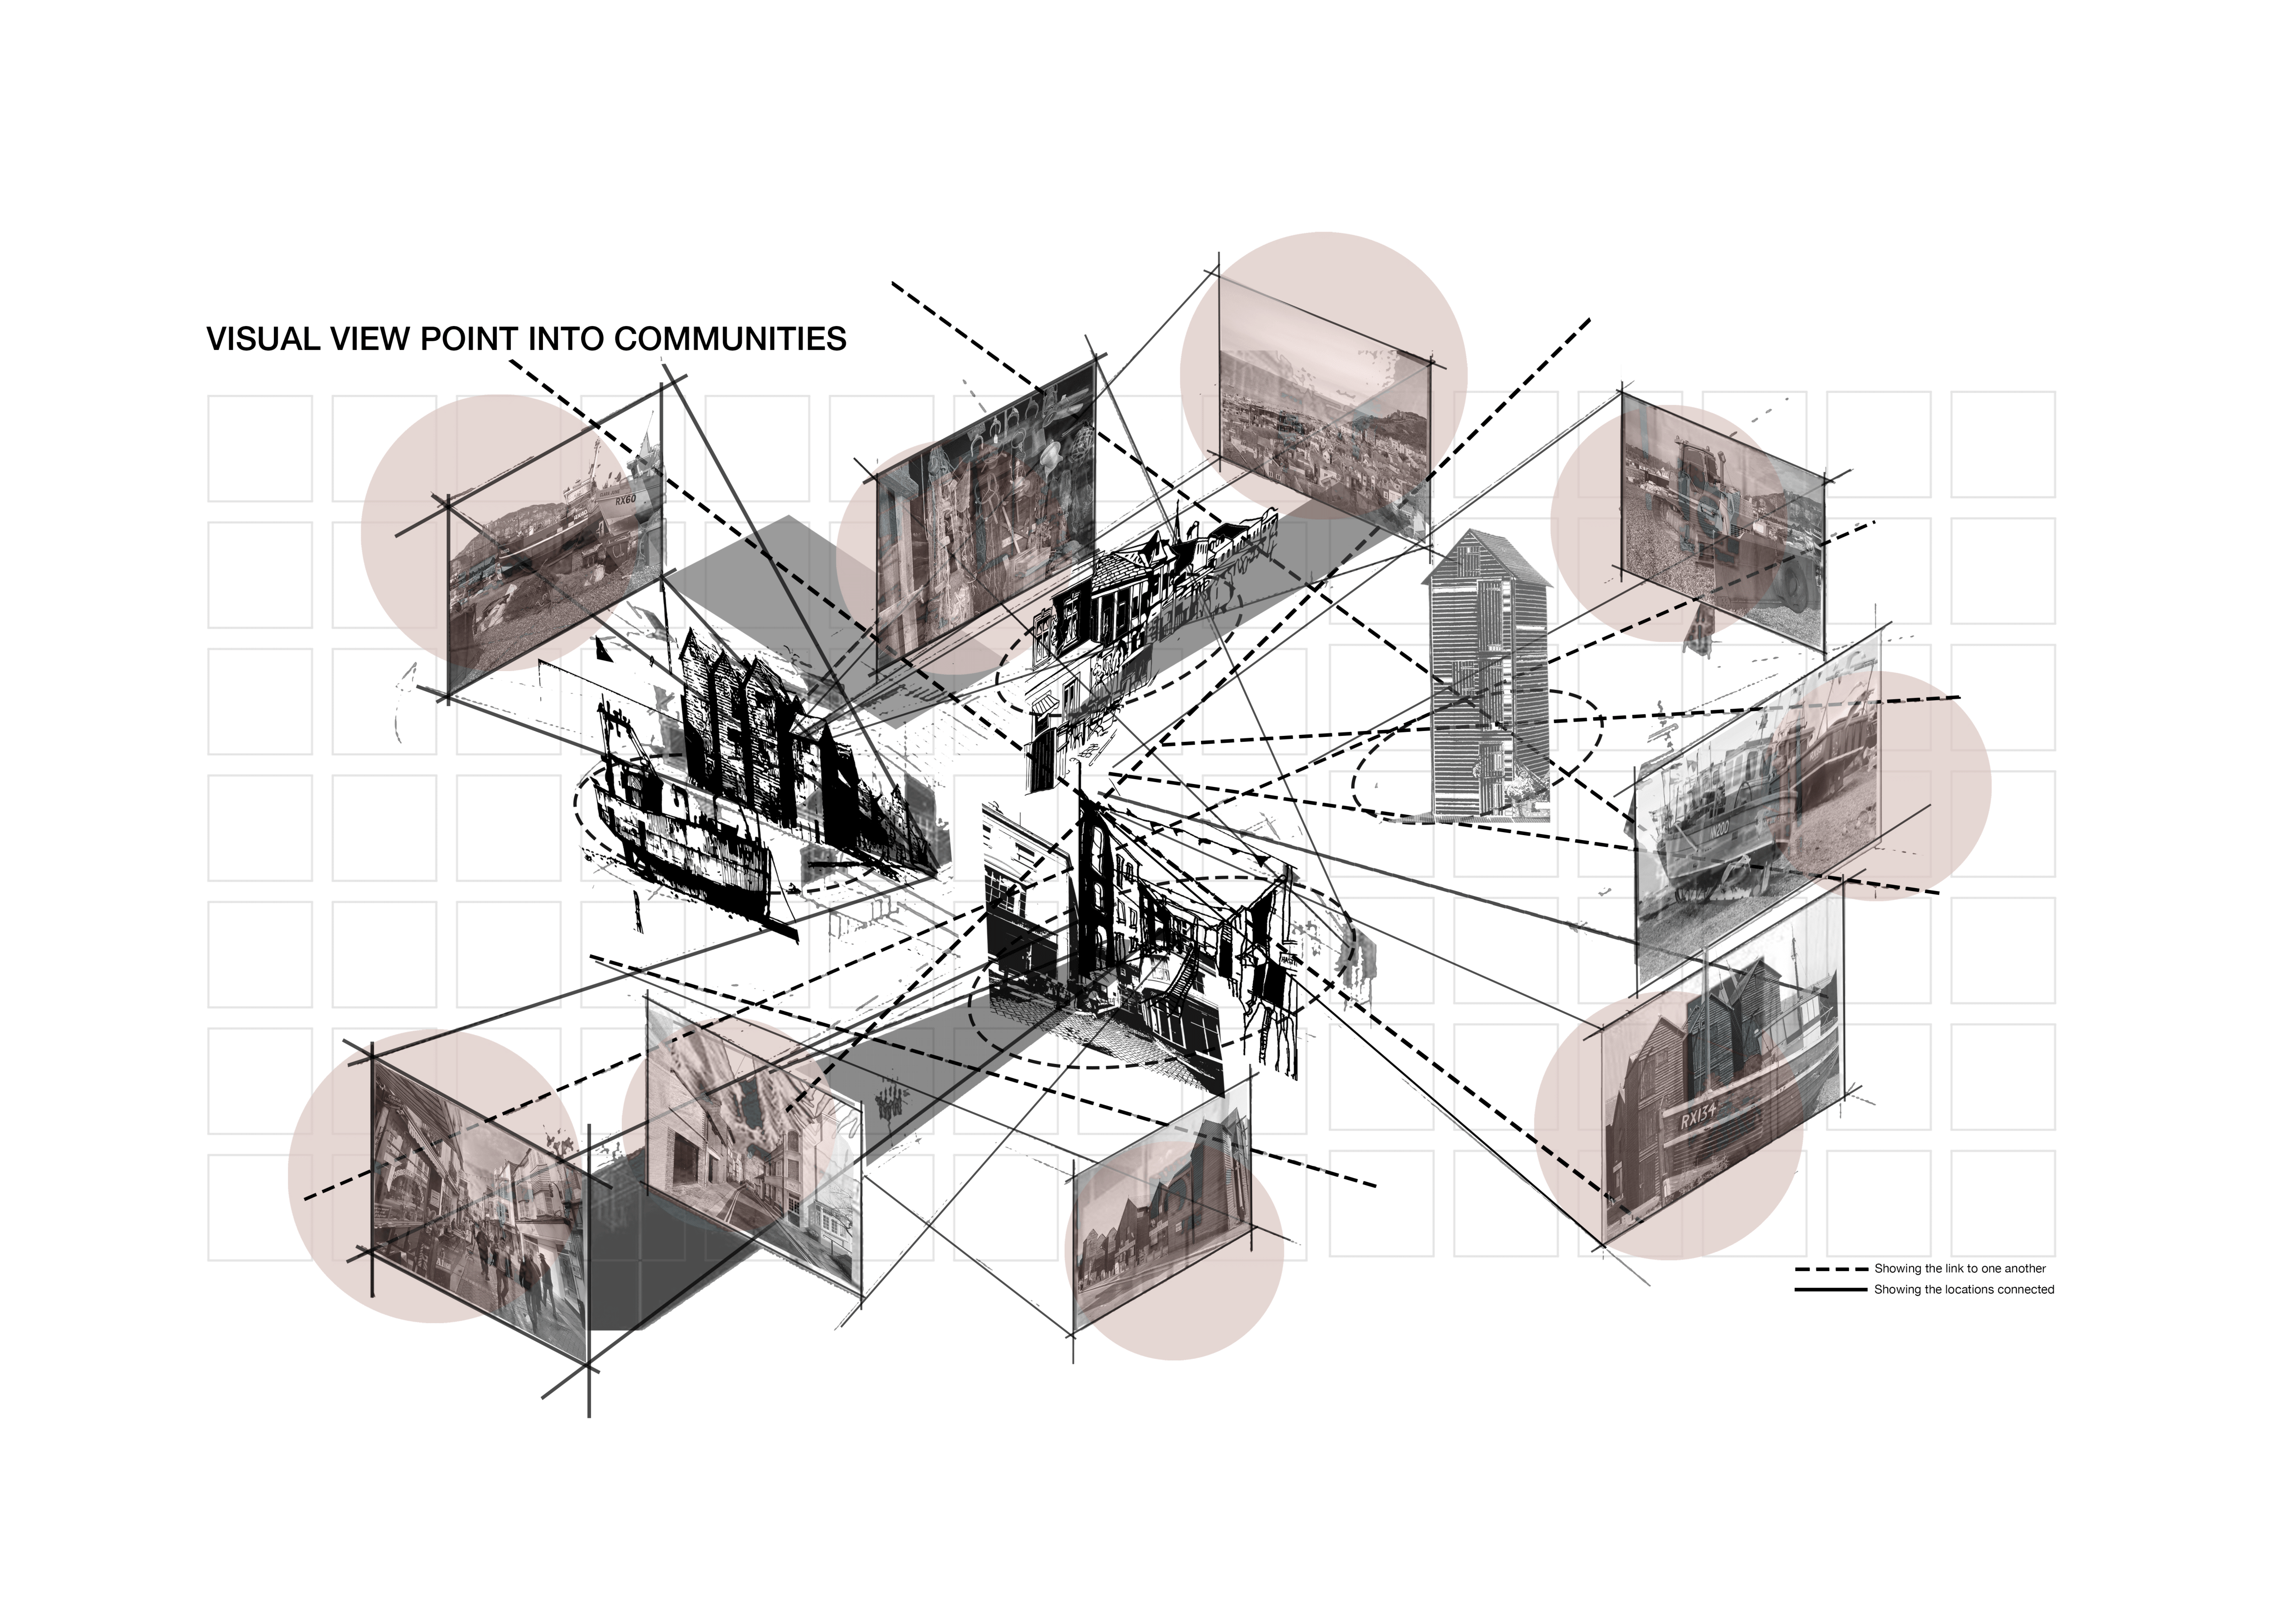 Image displaying people in their Communities and how they interact with one another.